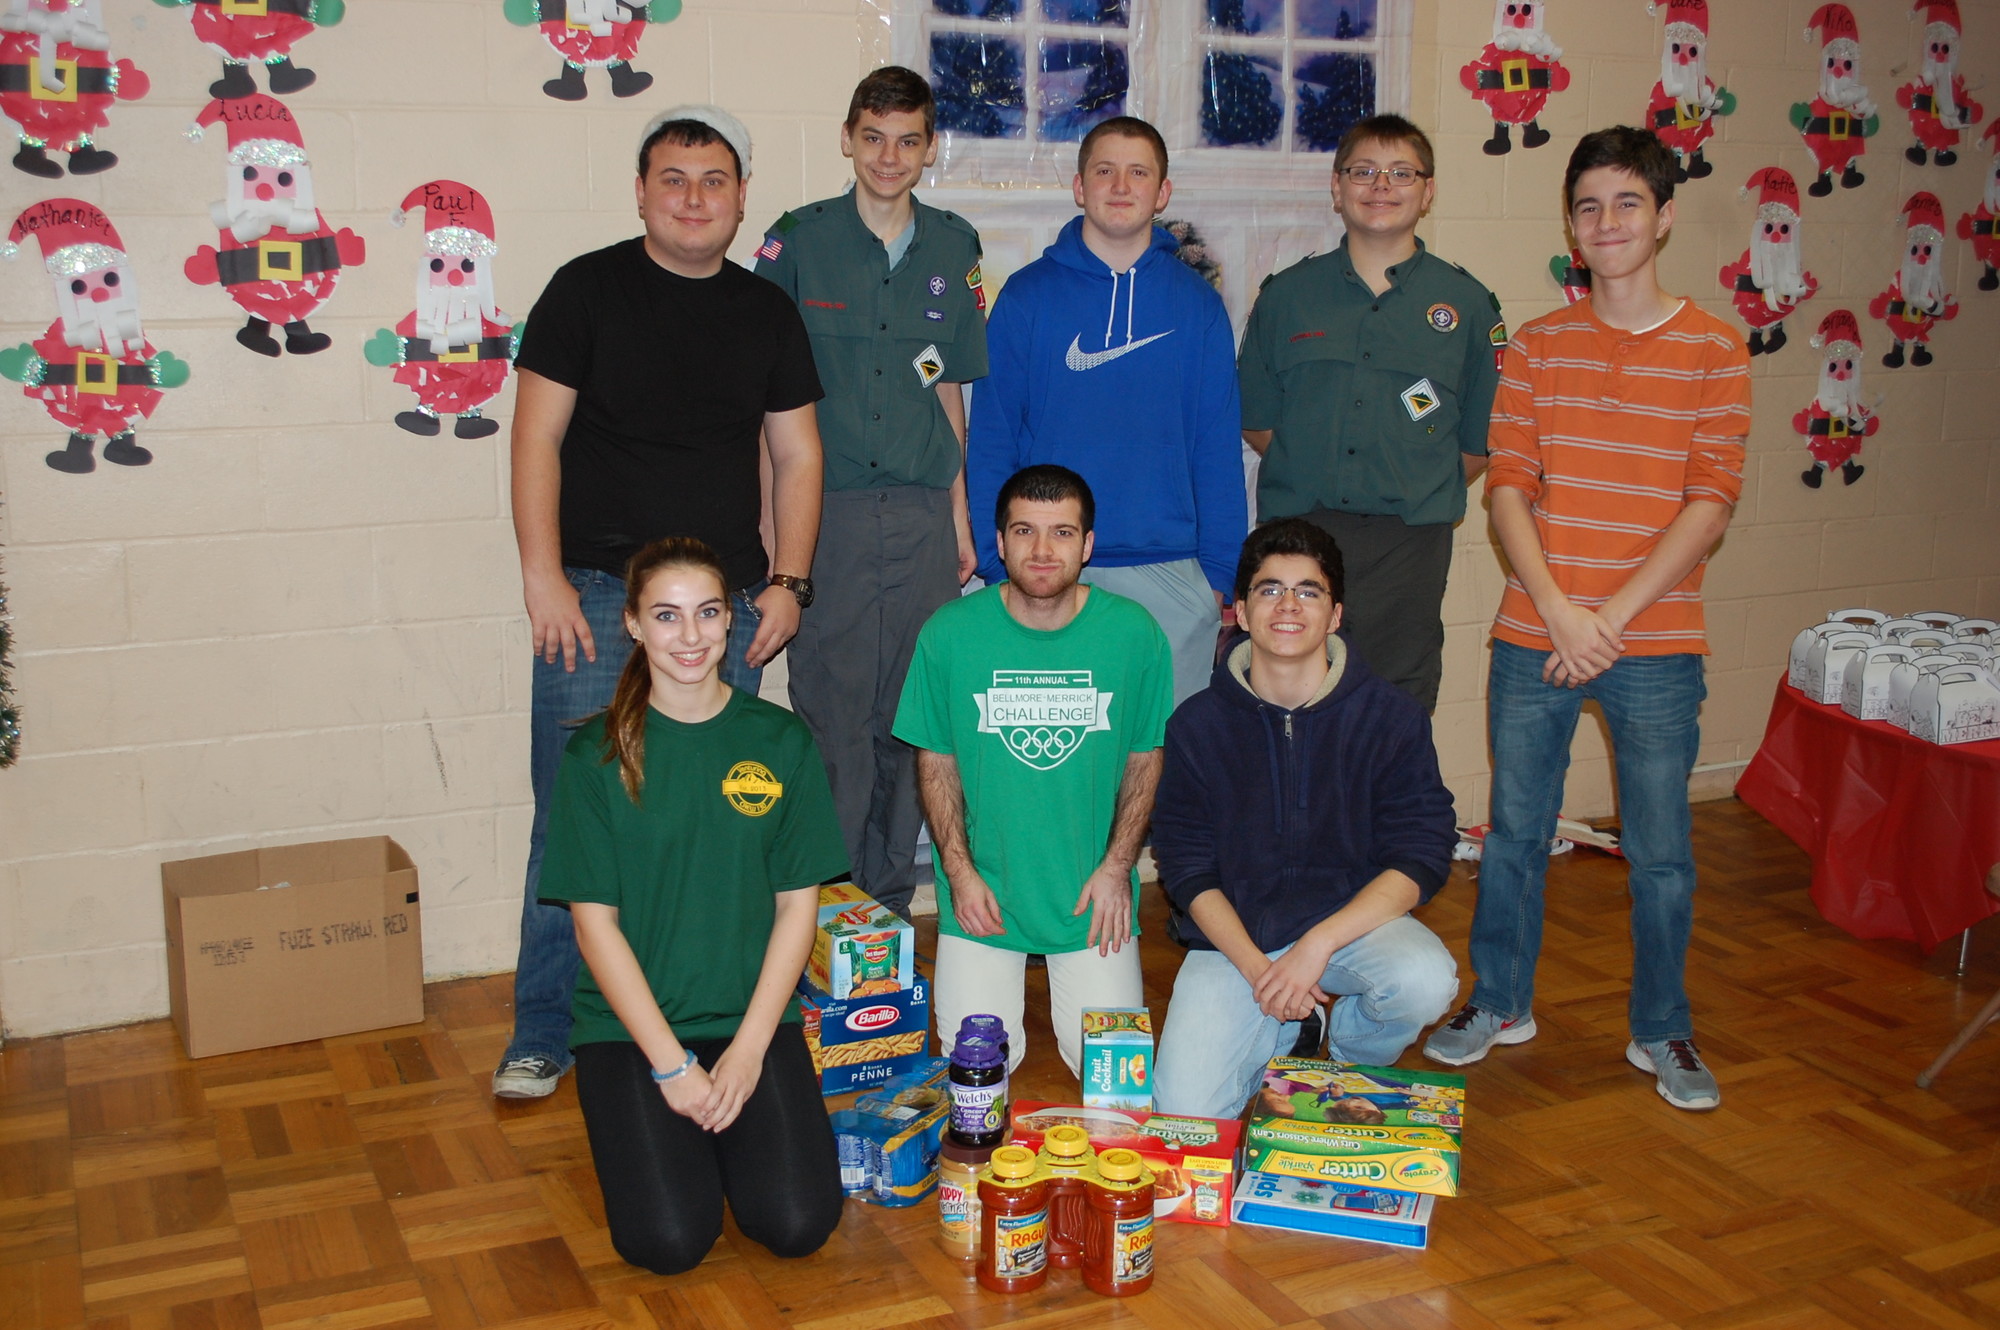 Members of Venture Crew 130, based in Wantagh, held a holiday food drive to benefit the St. Frances de Chantal food pantry.